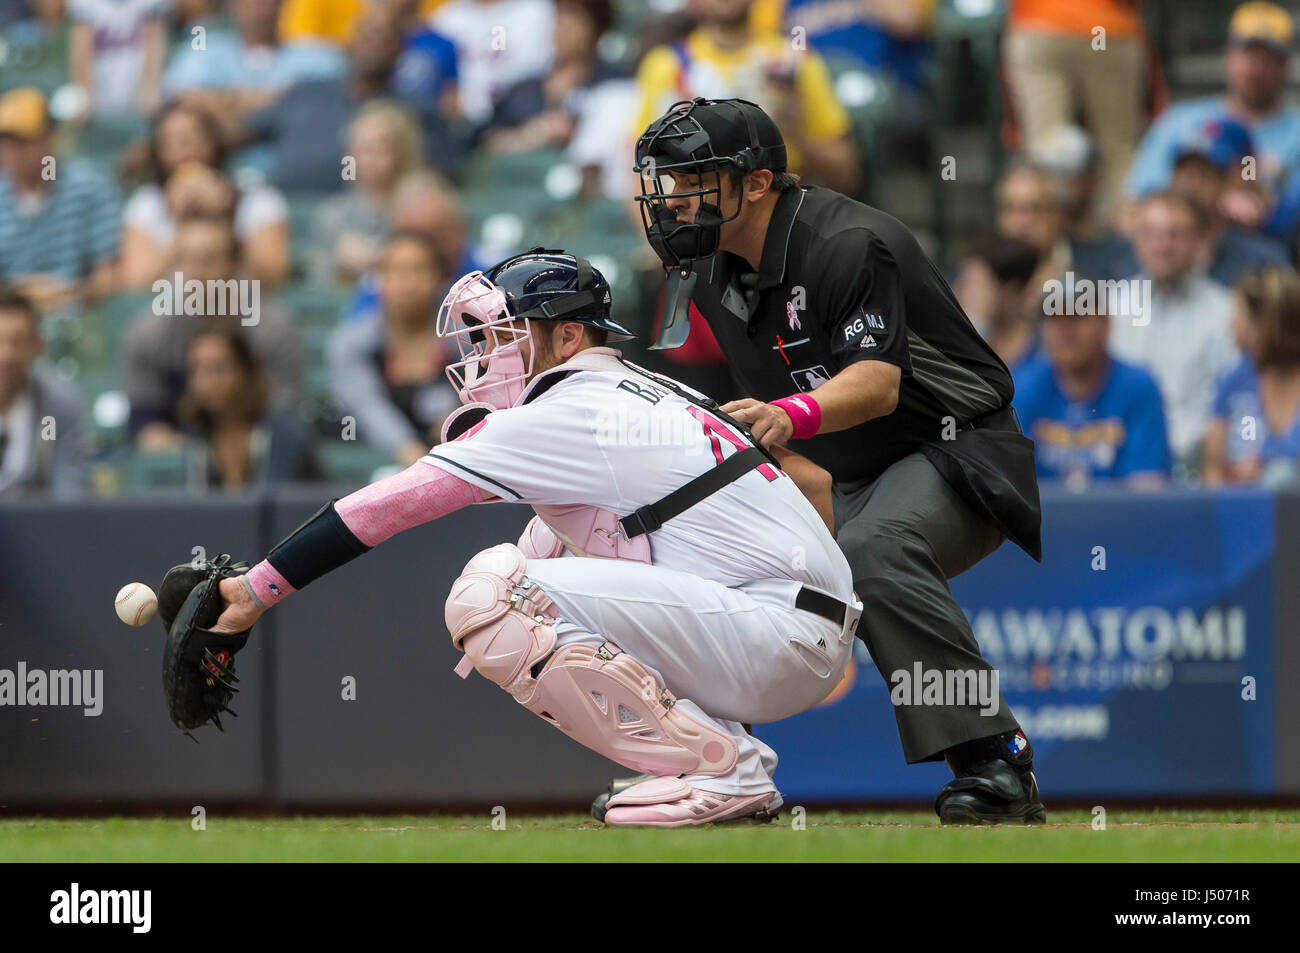 Miller Park. 13th May, 2017. Milwaukee Brewers catcher Jett Bandy #47 and home plate umpire Mark Ripperger #90 during the Major League Baseball game between the Milwaukee Brewers and the New York Mets at Miller Park. Credit: csm/Alamy Live News Stock Photo